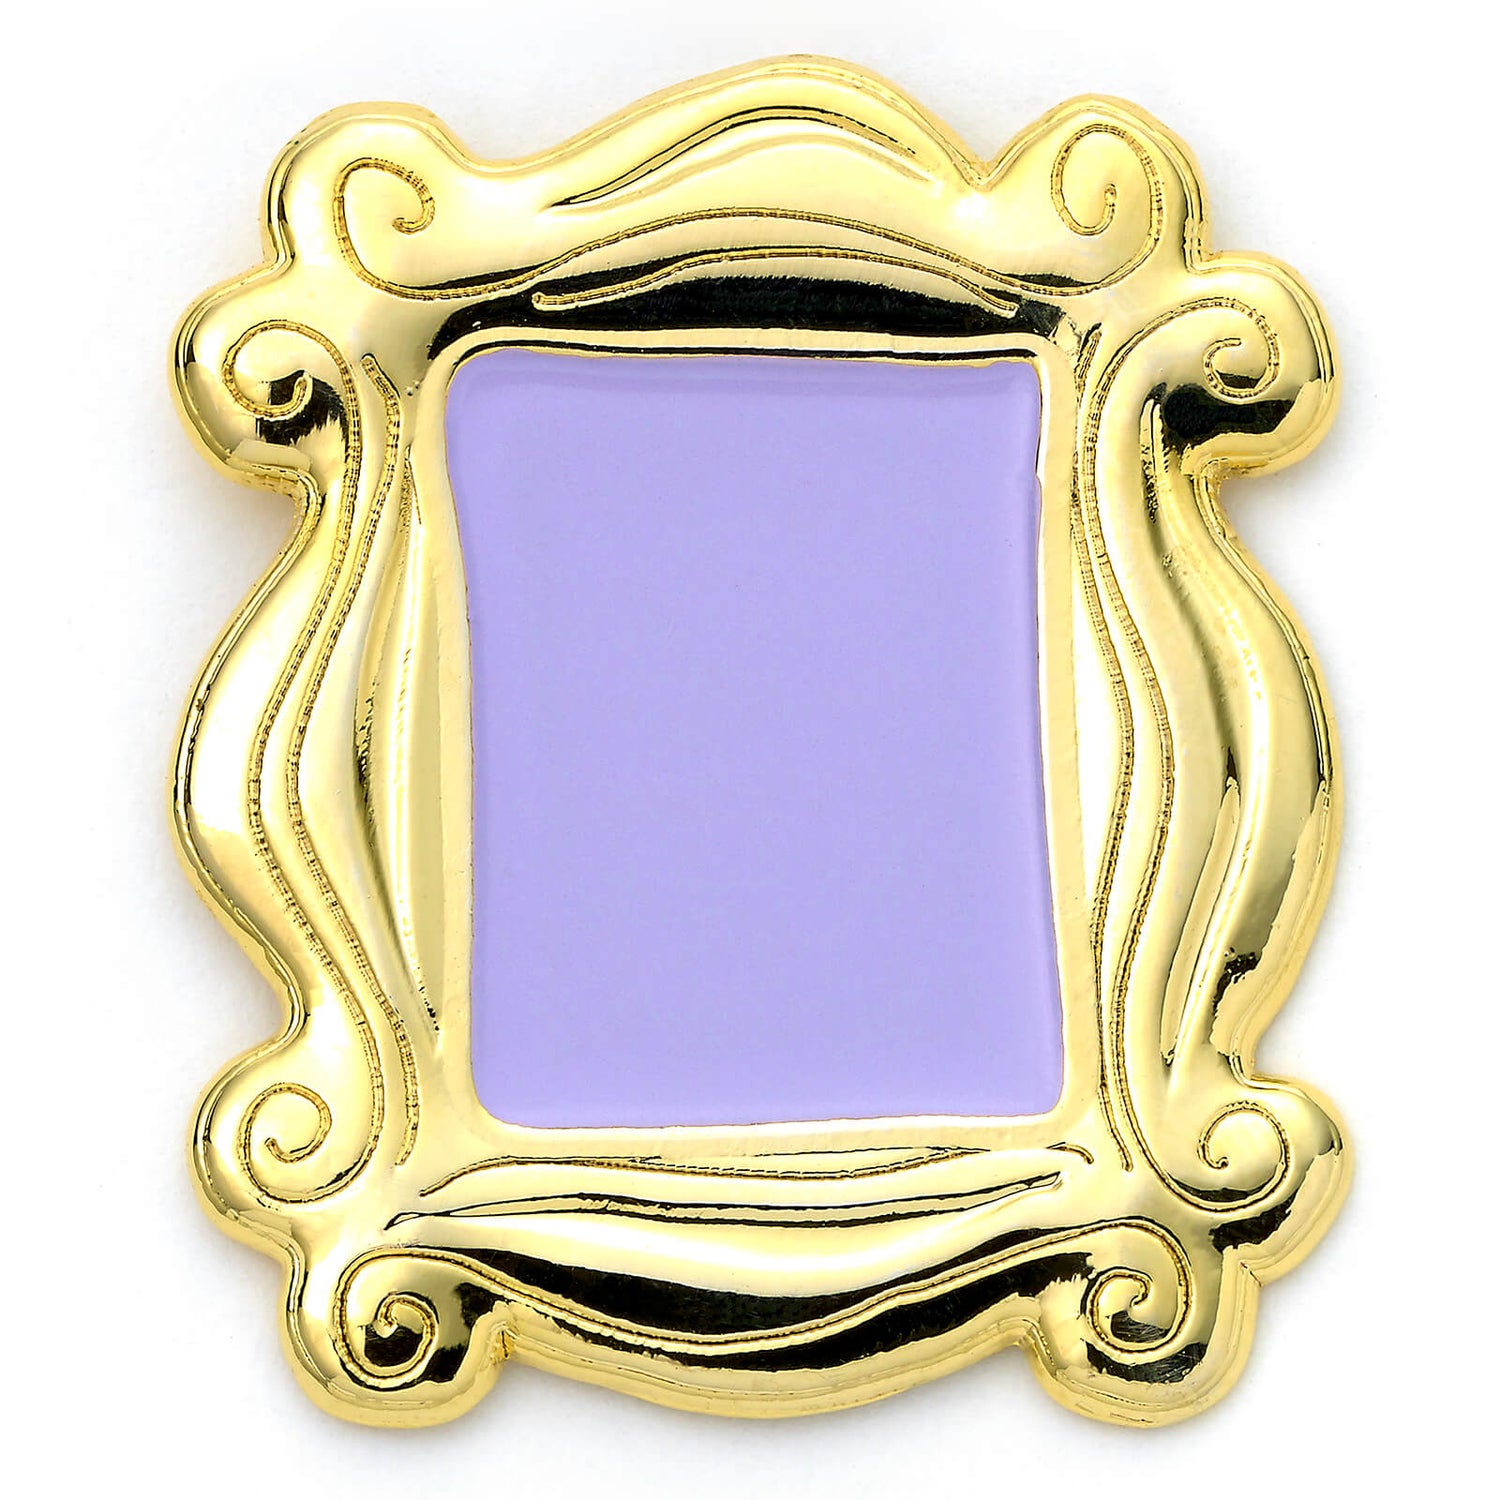 Friends TV Show Frame Pin Badge